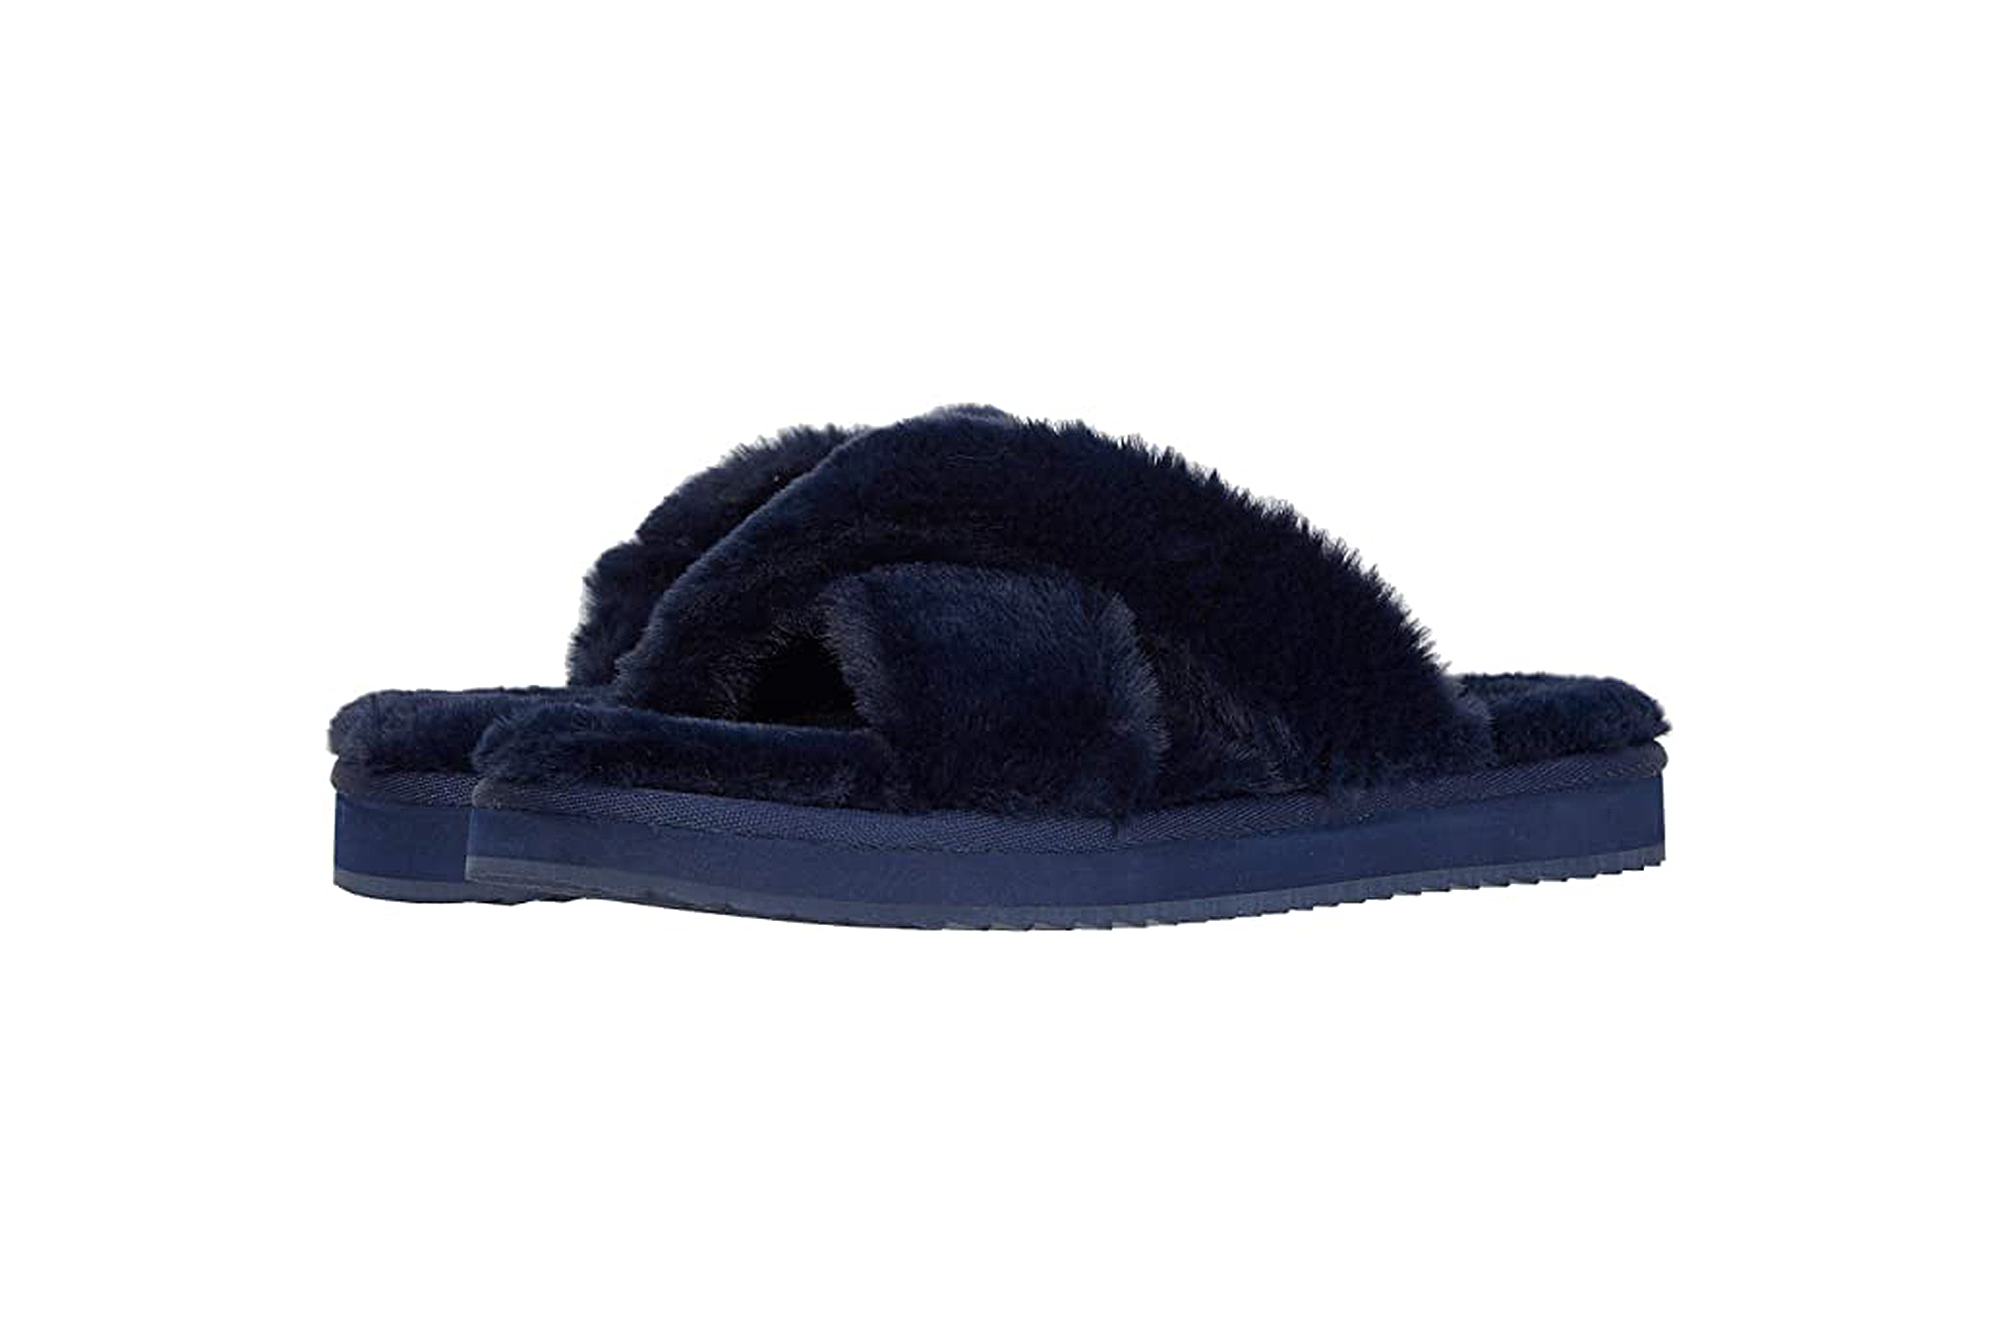 UGG Slippers Are on Sale for Just $25 